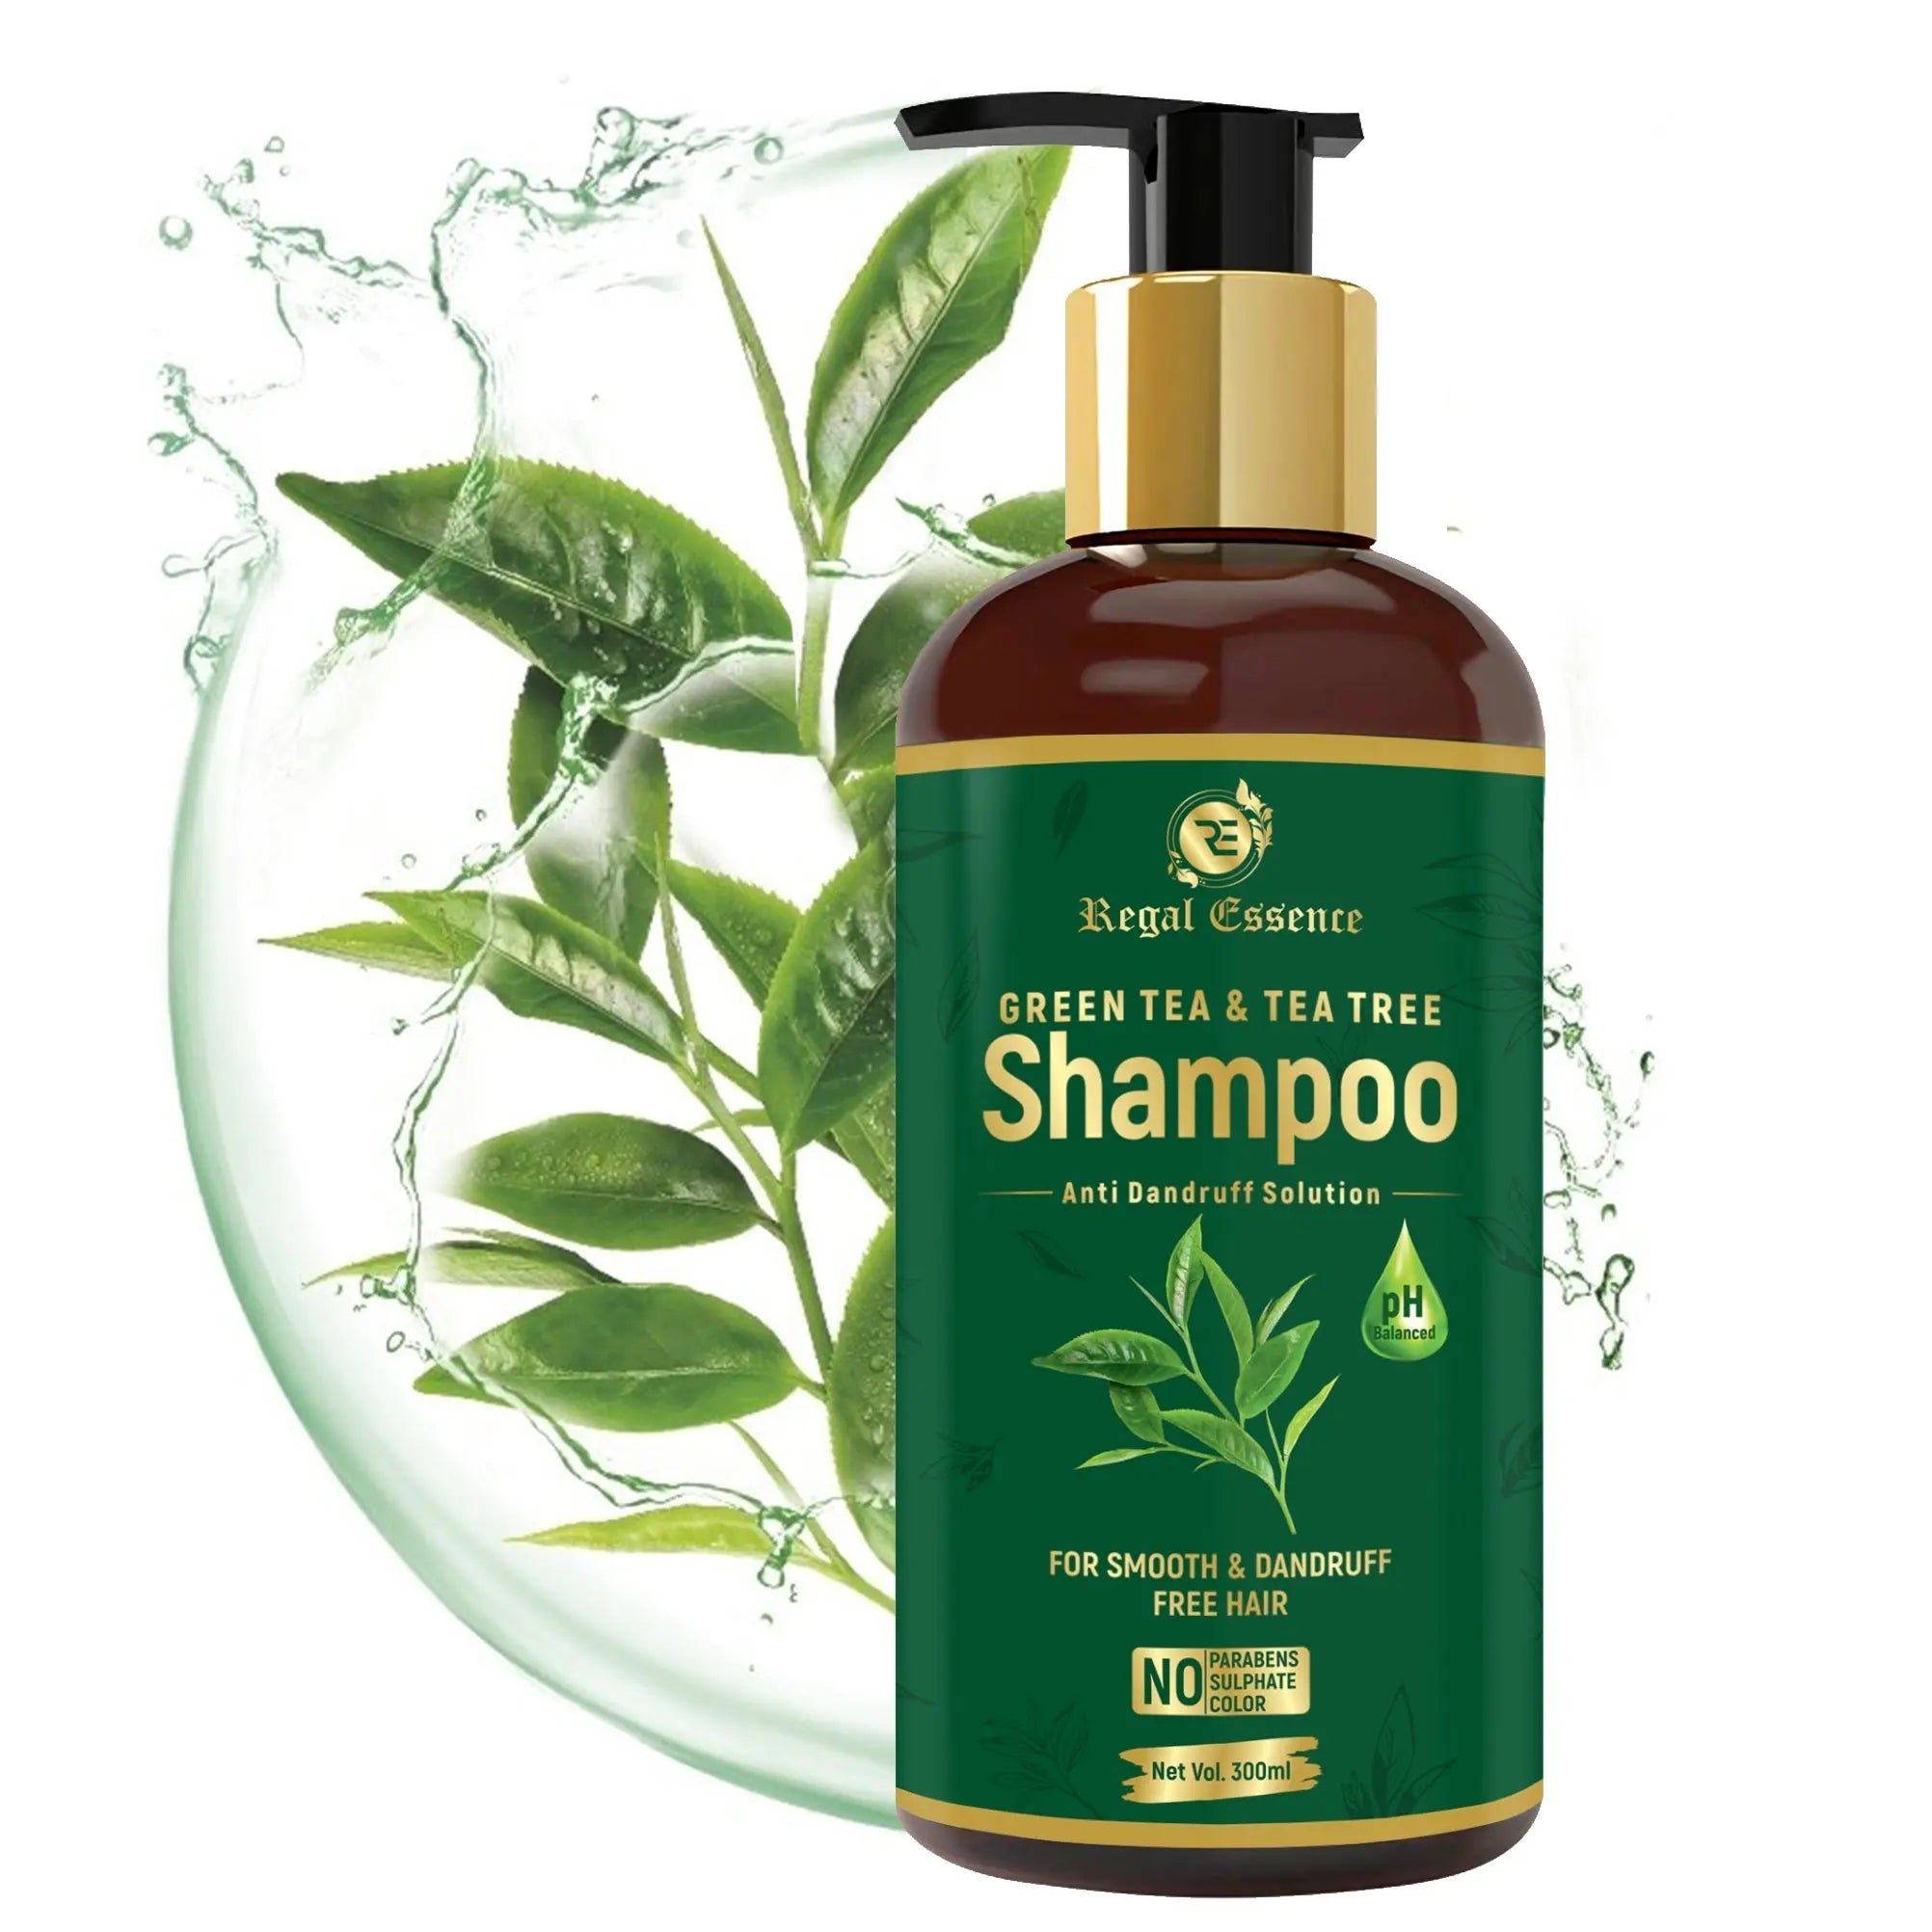 Green Tea Oil Pure Skin Face Buy Shop Online India Best Price  Hollywood  Secrets